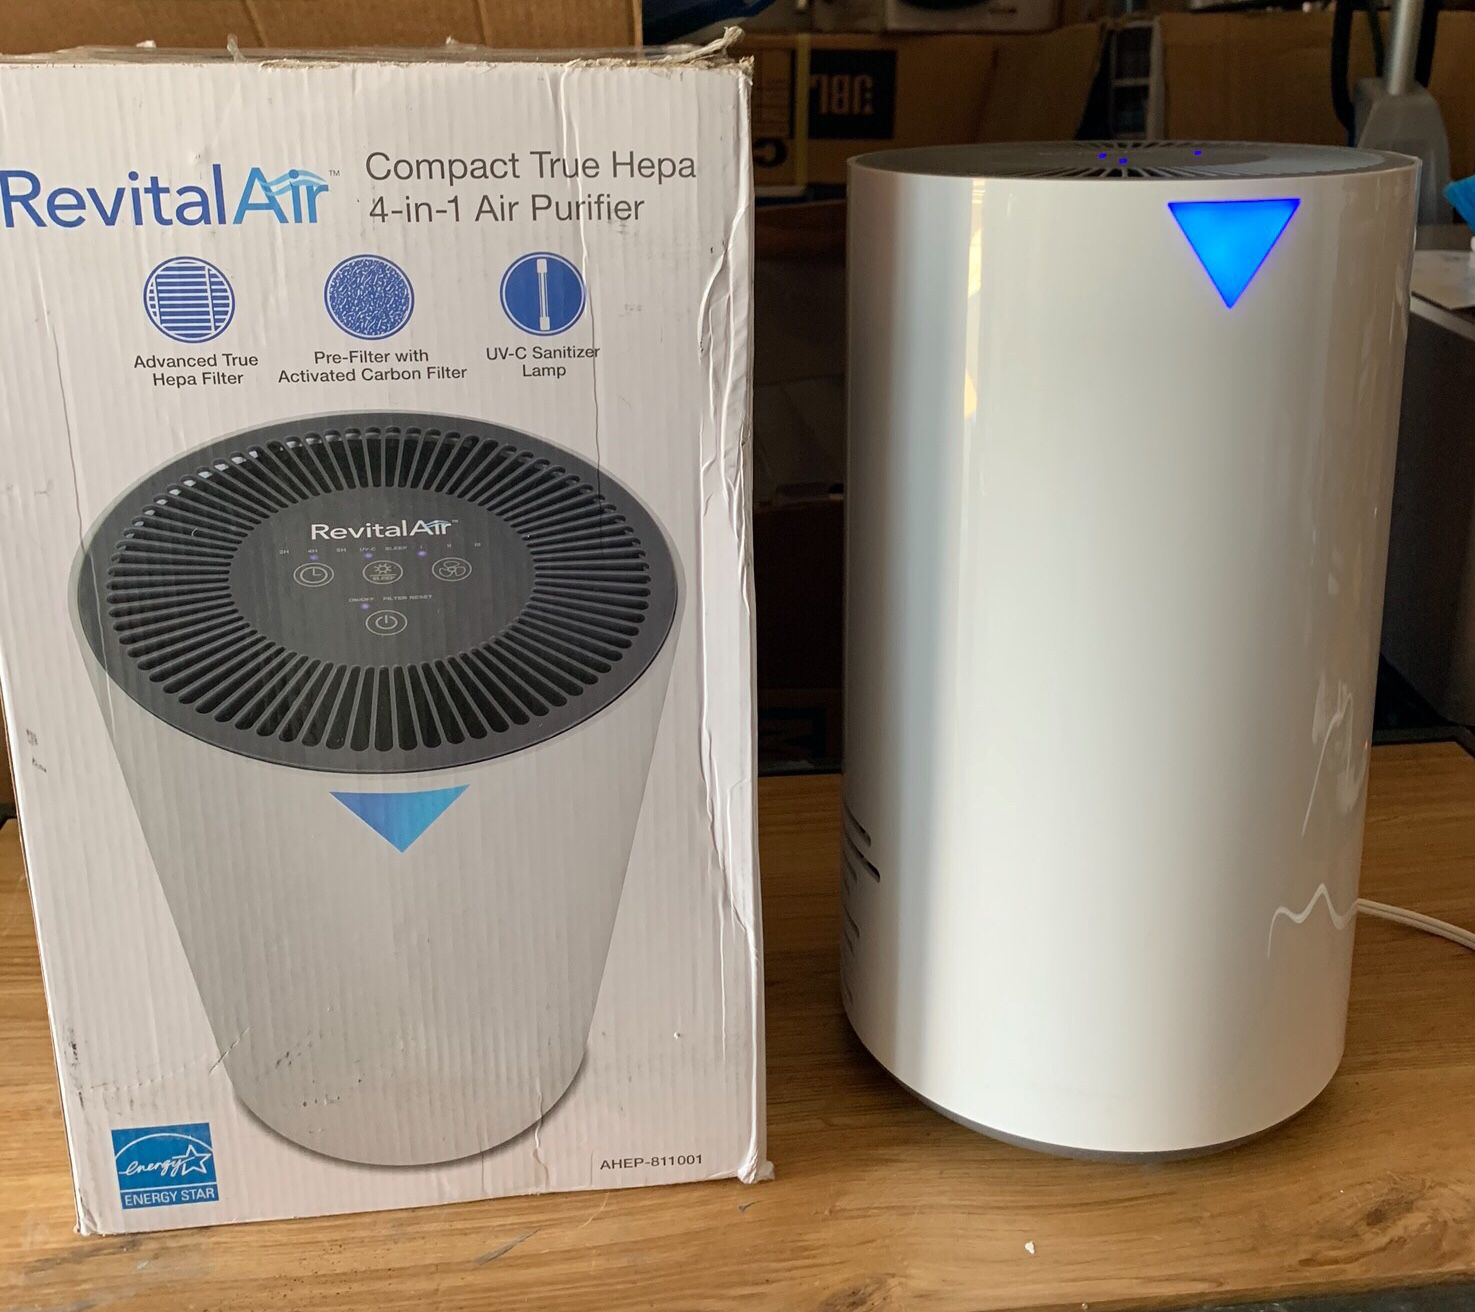 Revital air 4 in 1 air purifier Compact true HEPA with a carbon filter like new open box excellent condition never been used in original packaging